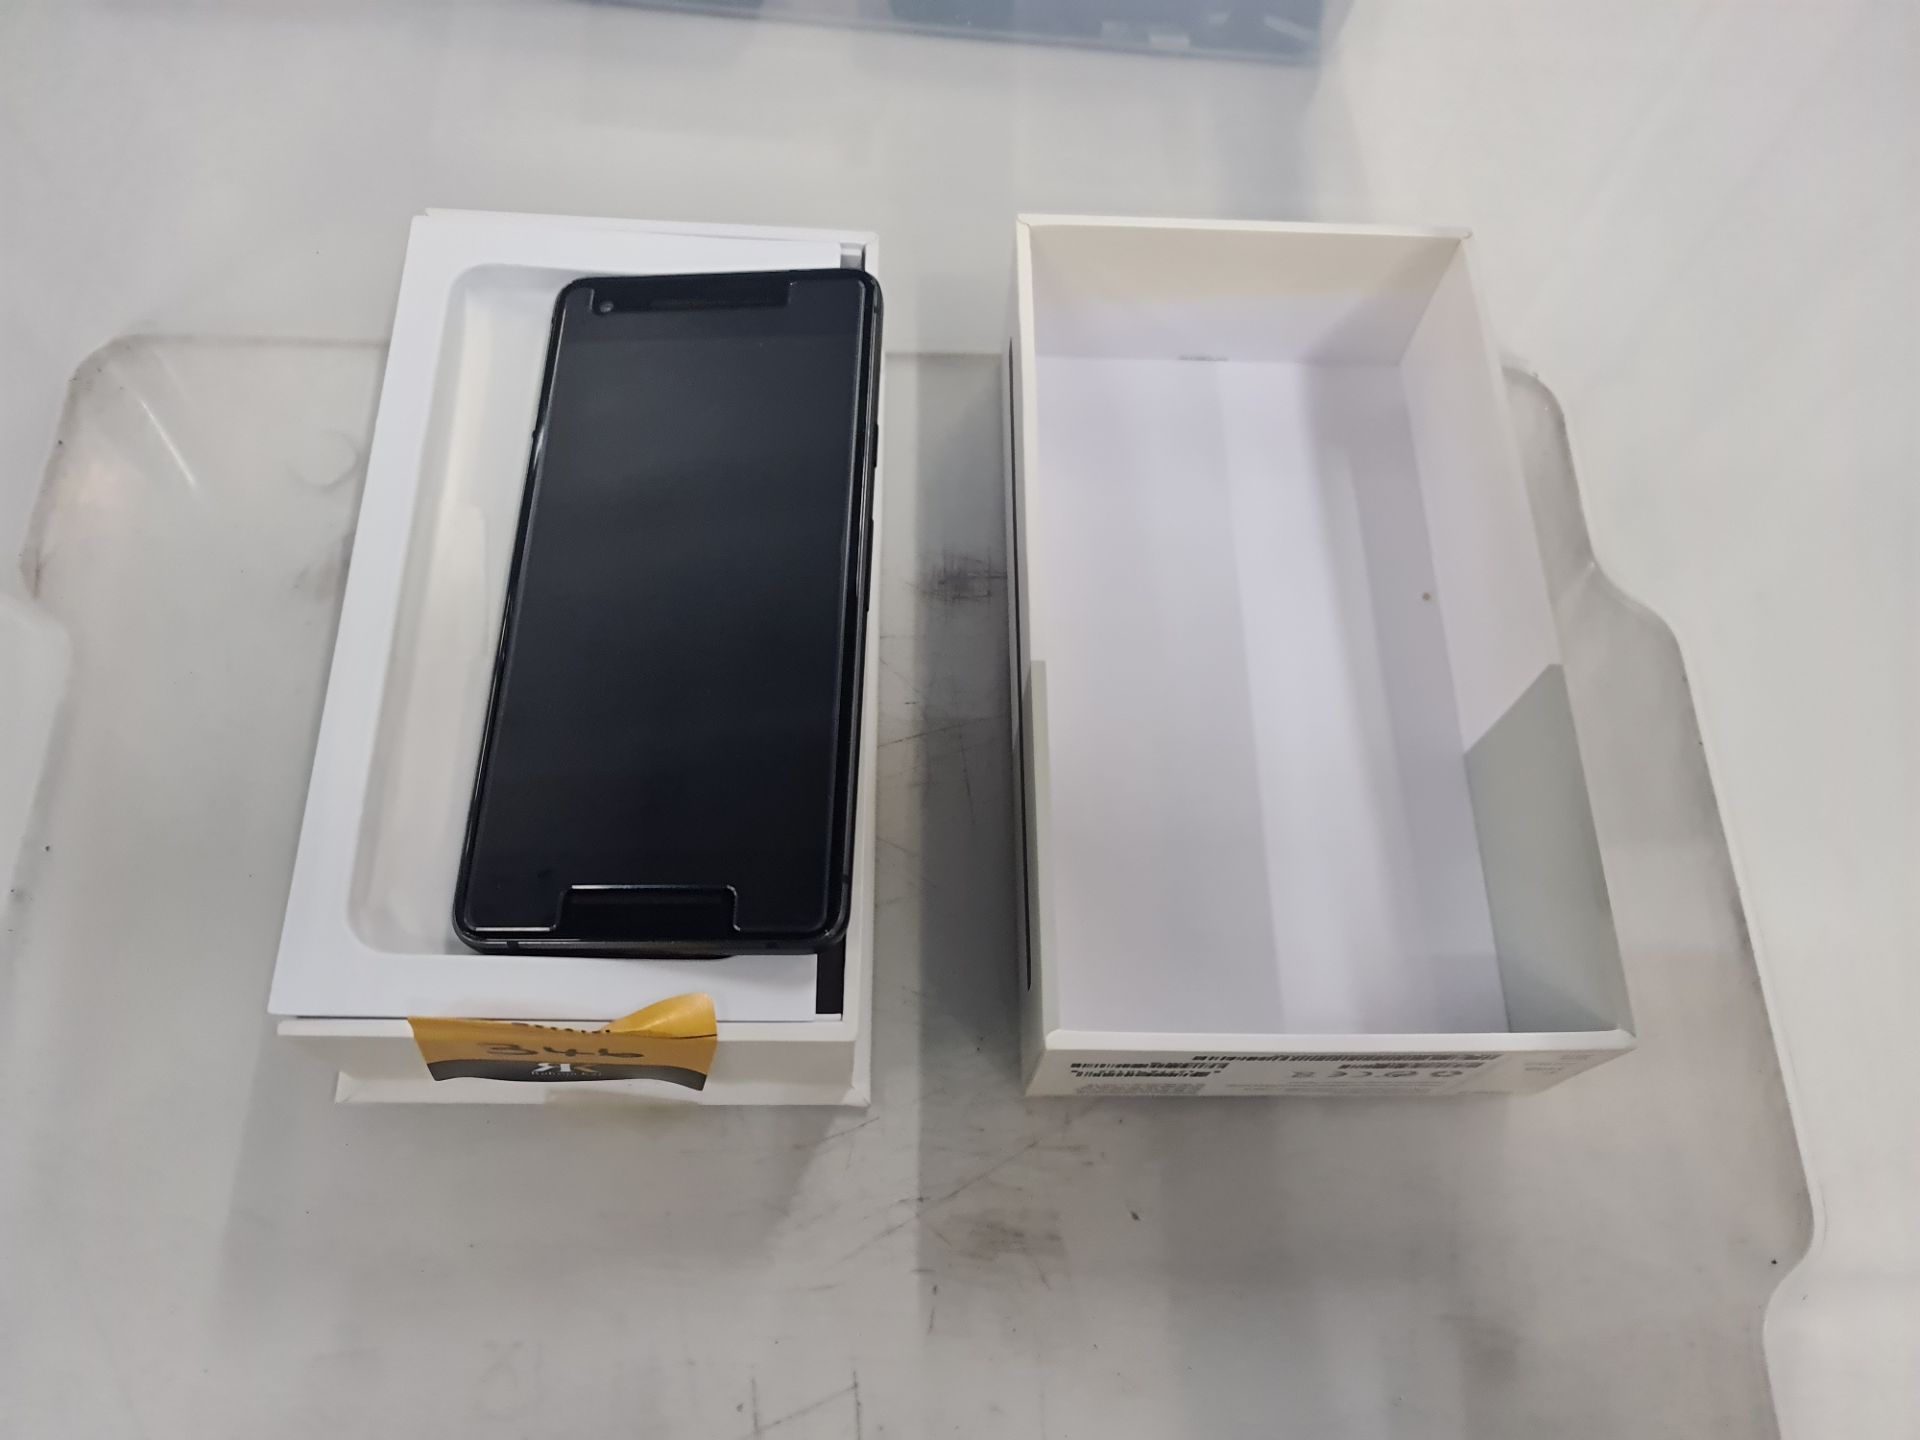 Google Pixel 2 mobile phone with box. - Image 7 of 11